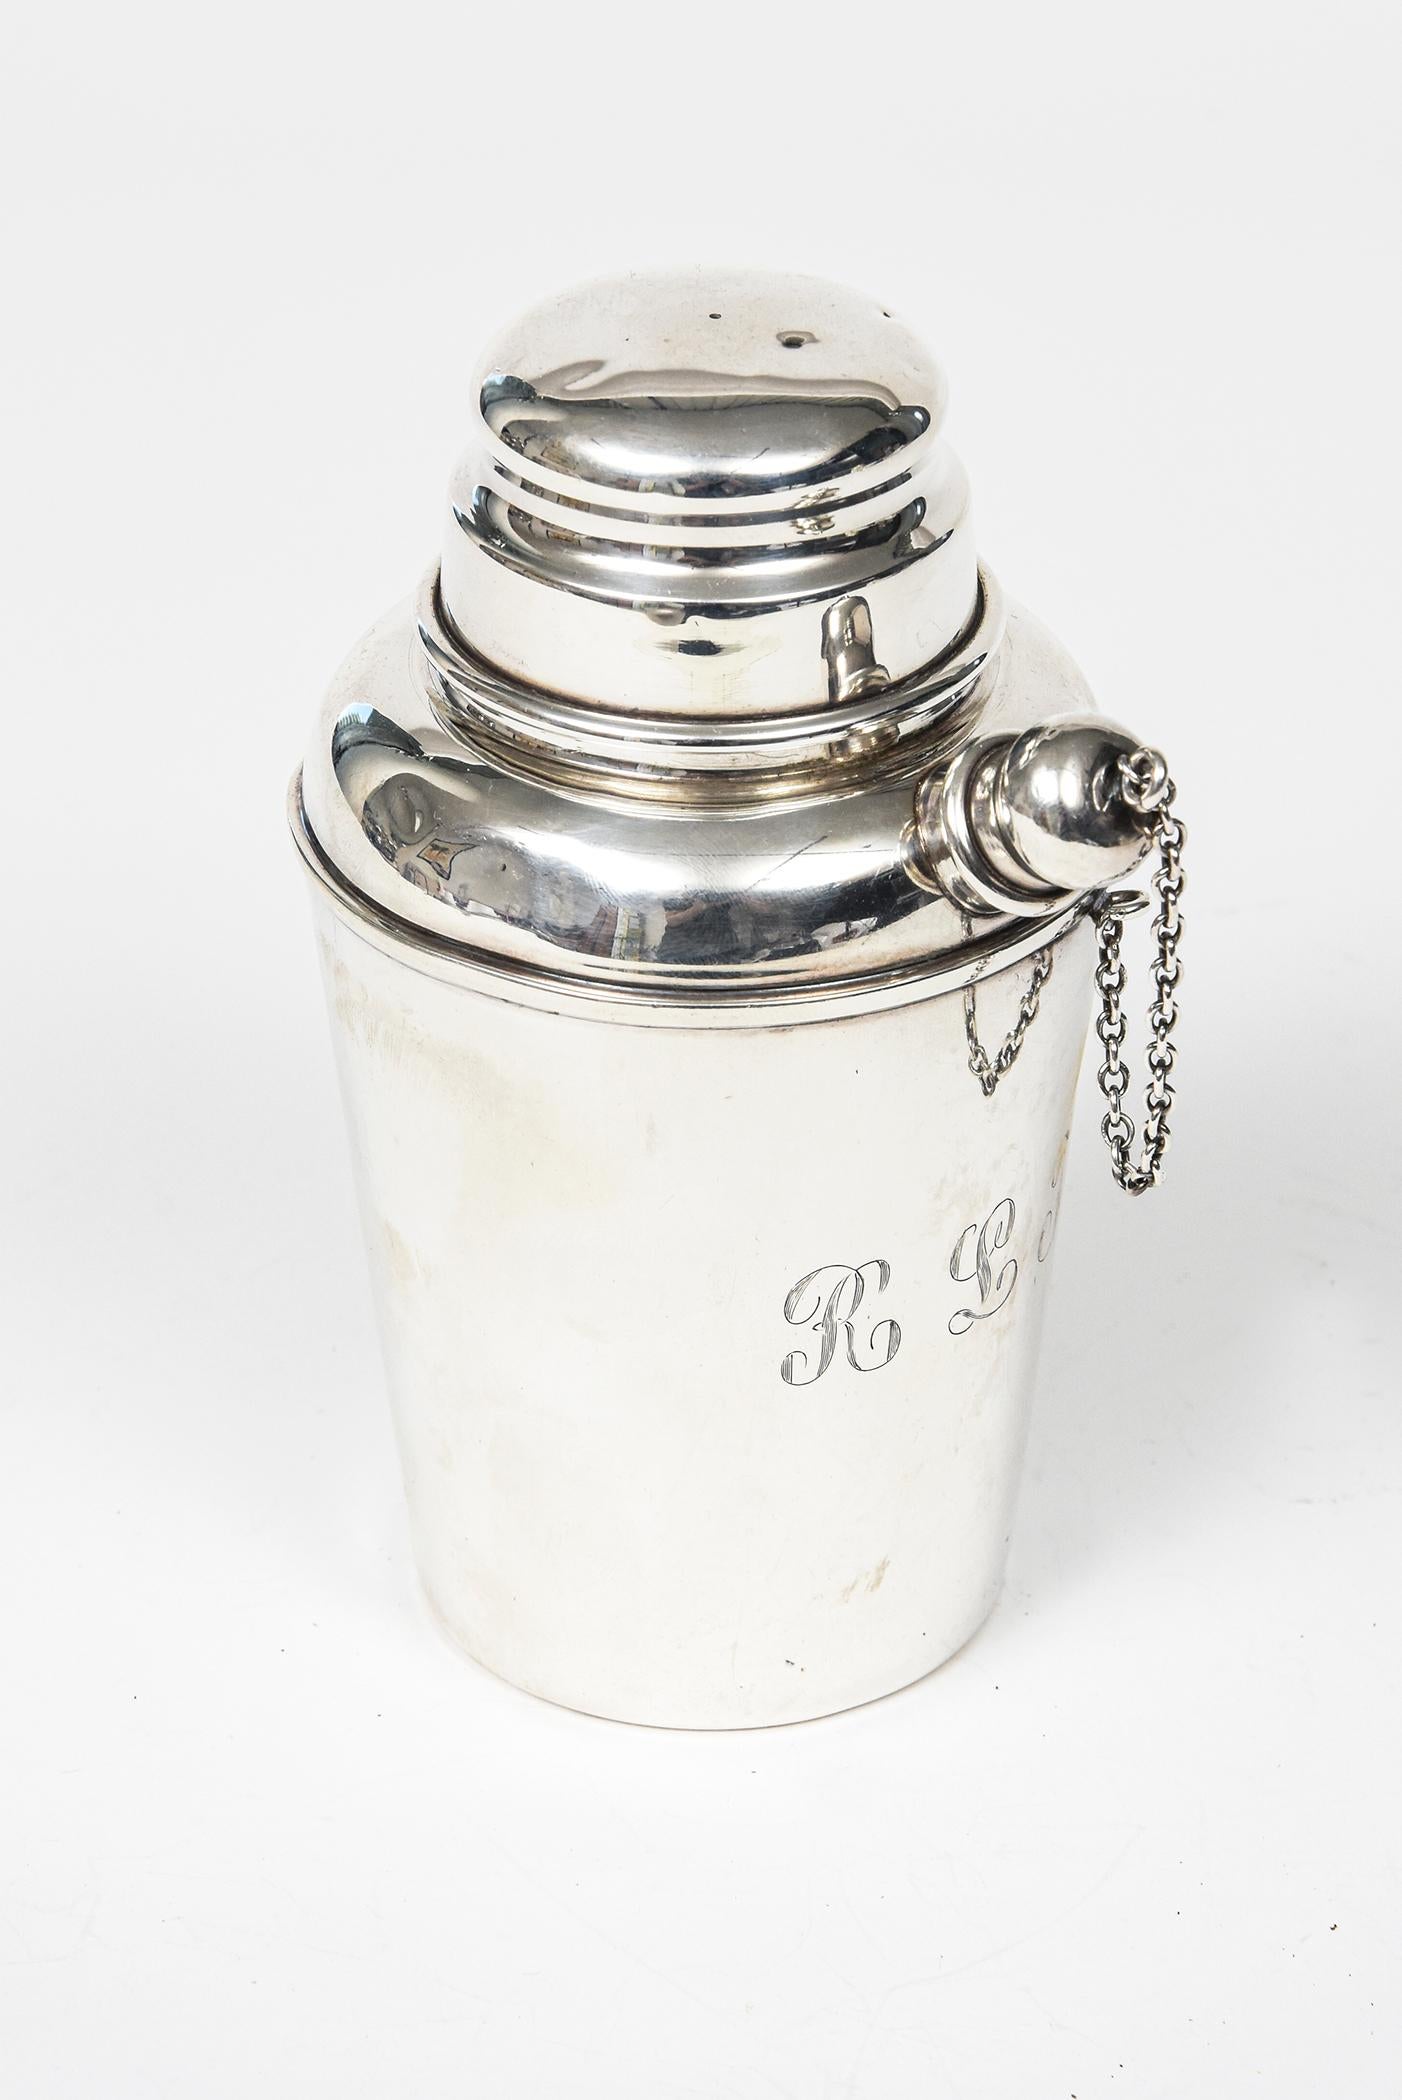 Fabulous Reed & Barton sterling mini martini shaker for making an individual martini. A tapered cylinder design with removable lift-up dome lid, pronounced spout with stopper on chain. The shaker is engraved on the bottom and has RLT initials in